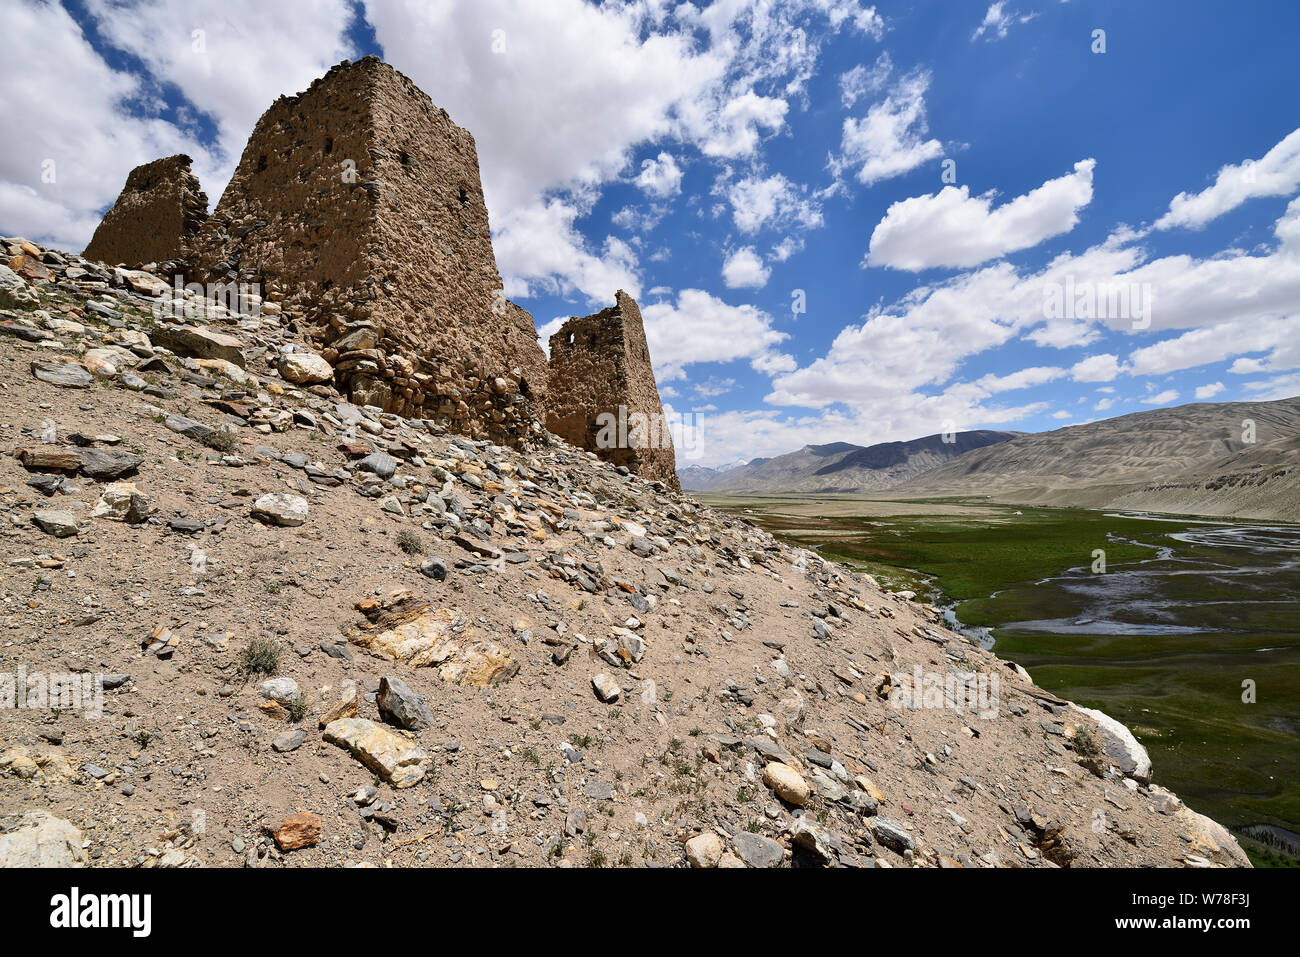 View on the remote Shakhdara Valley in the Pamir mountain, Ruin old fortress, Tajikistan, Central Asia. Stock Photo